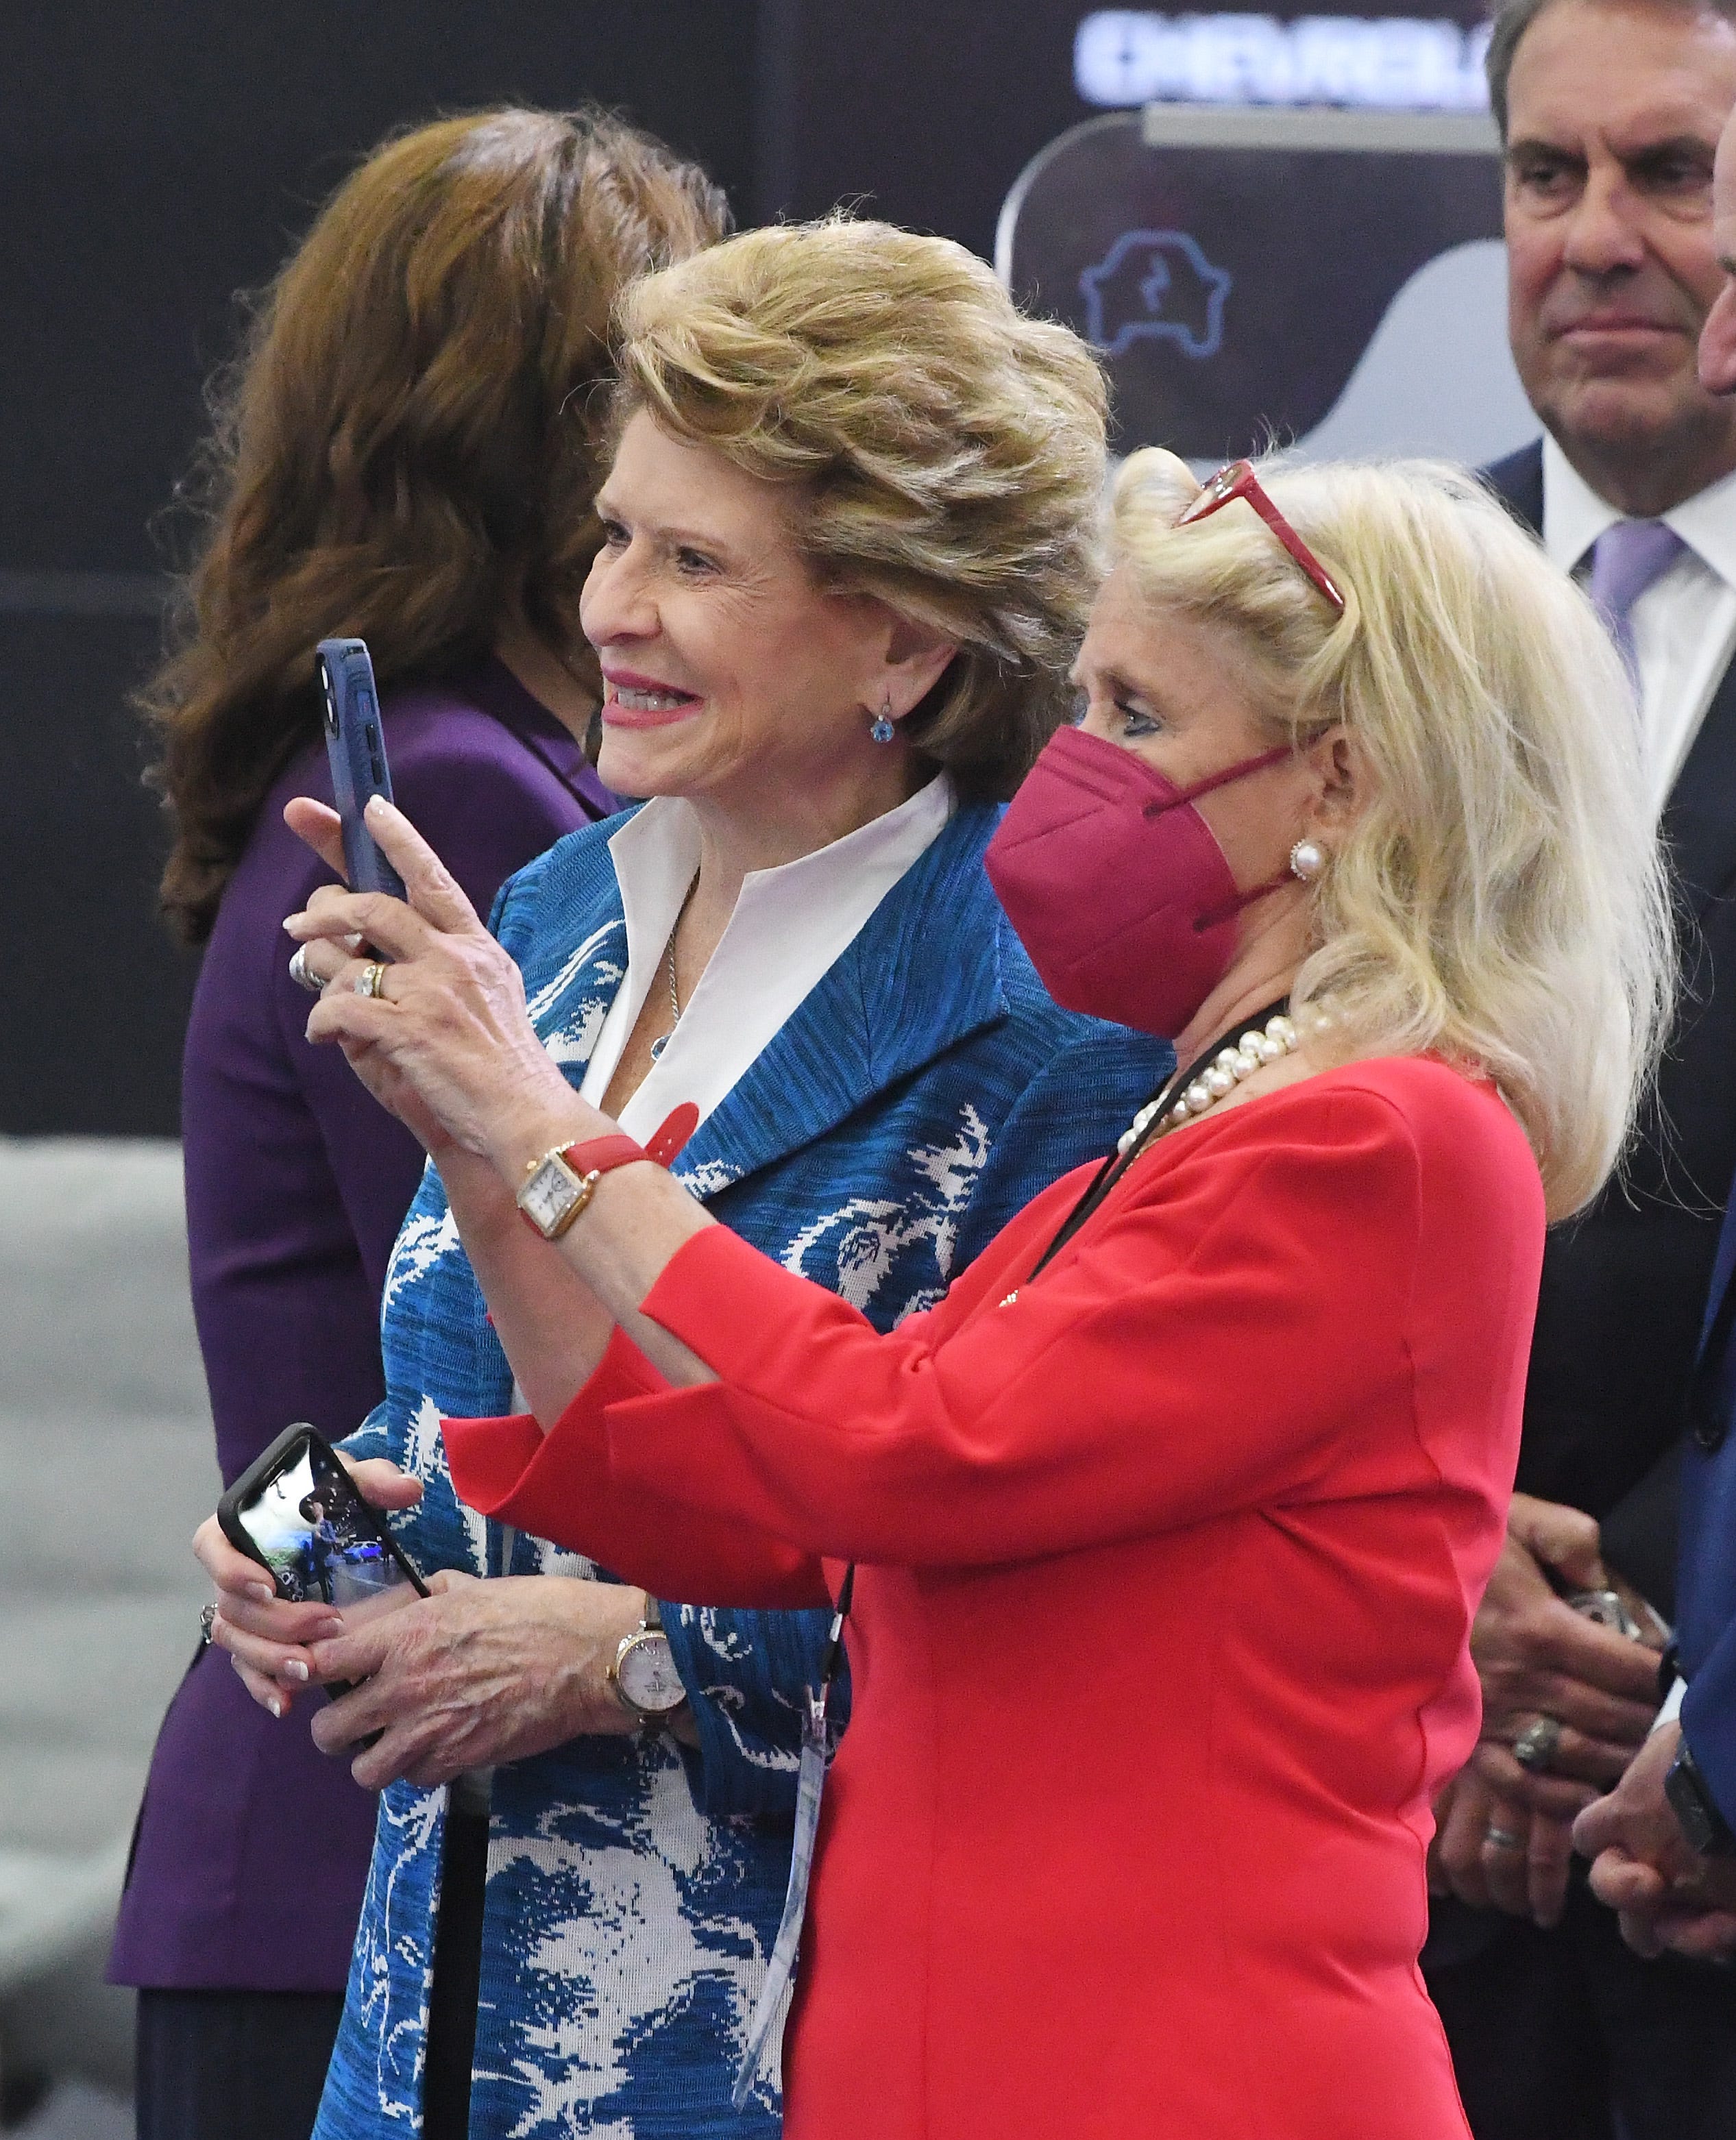 Senator Debbie Stabenow  and U.S. Representative Debbie Dingell take photos during a tour with President Joe Biden at the 2022 North American International Auto Show in Detroit, Michigan on September 14, 2022.